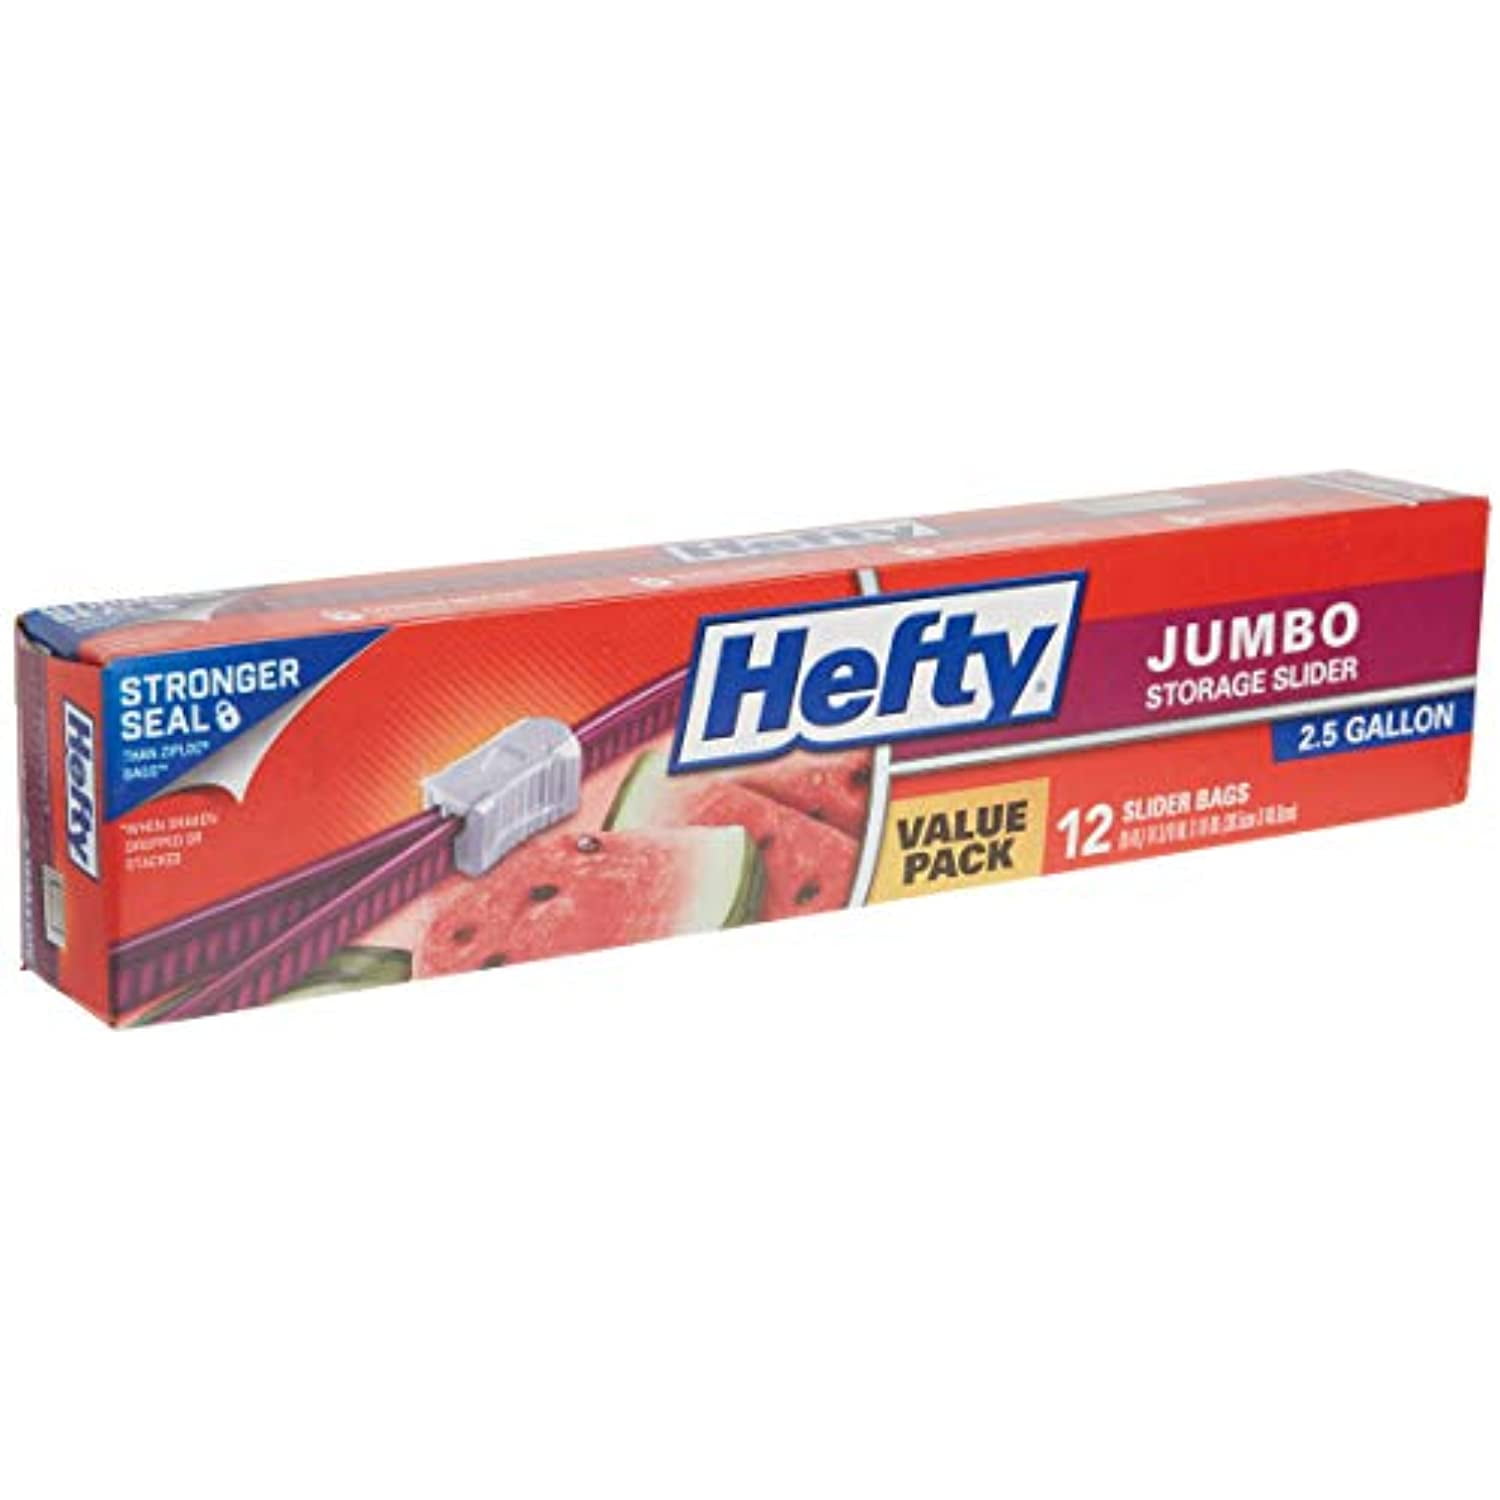 36 Total for sale online Hefty One Zip 2.5 Gallon Jumbo Bags 12 Count Boxes pack of 3 